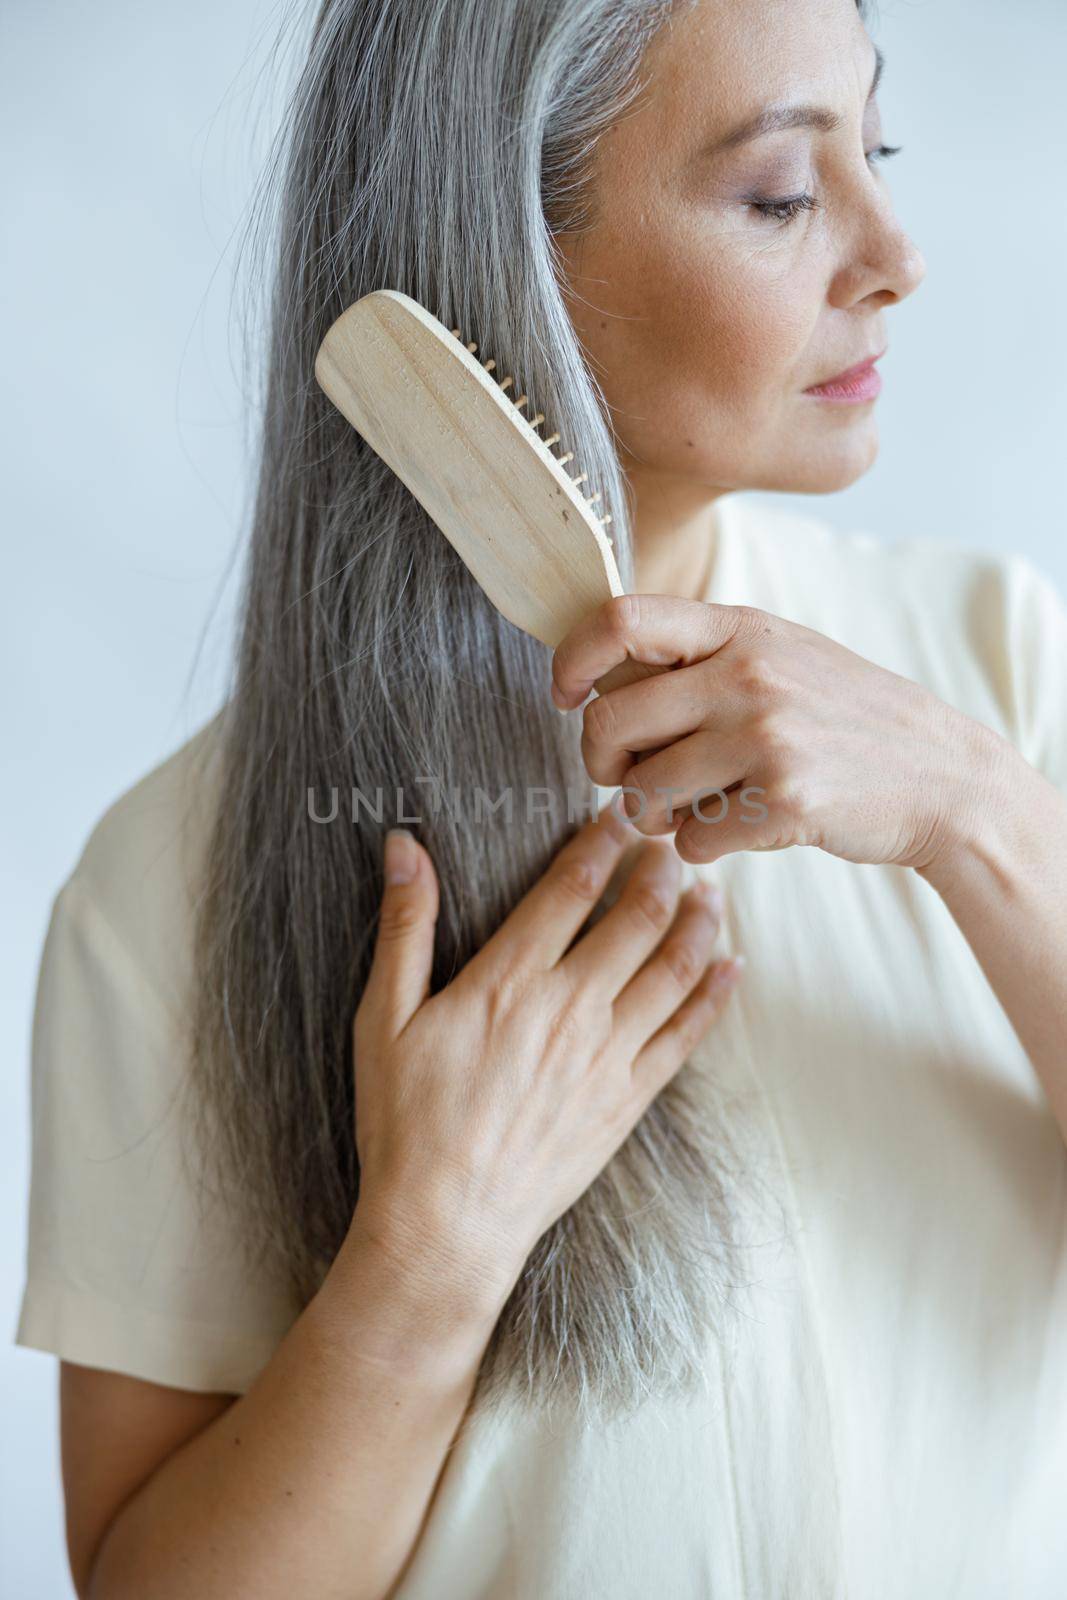 Tranquil middle aged Asian model brushes long hoary hair posing on light background in studio. Mature beauty lifestyle